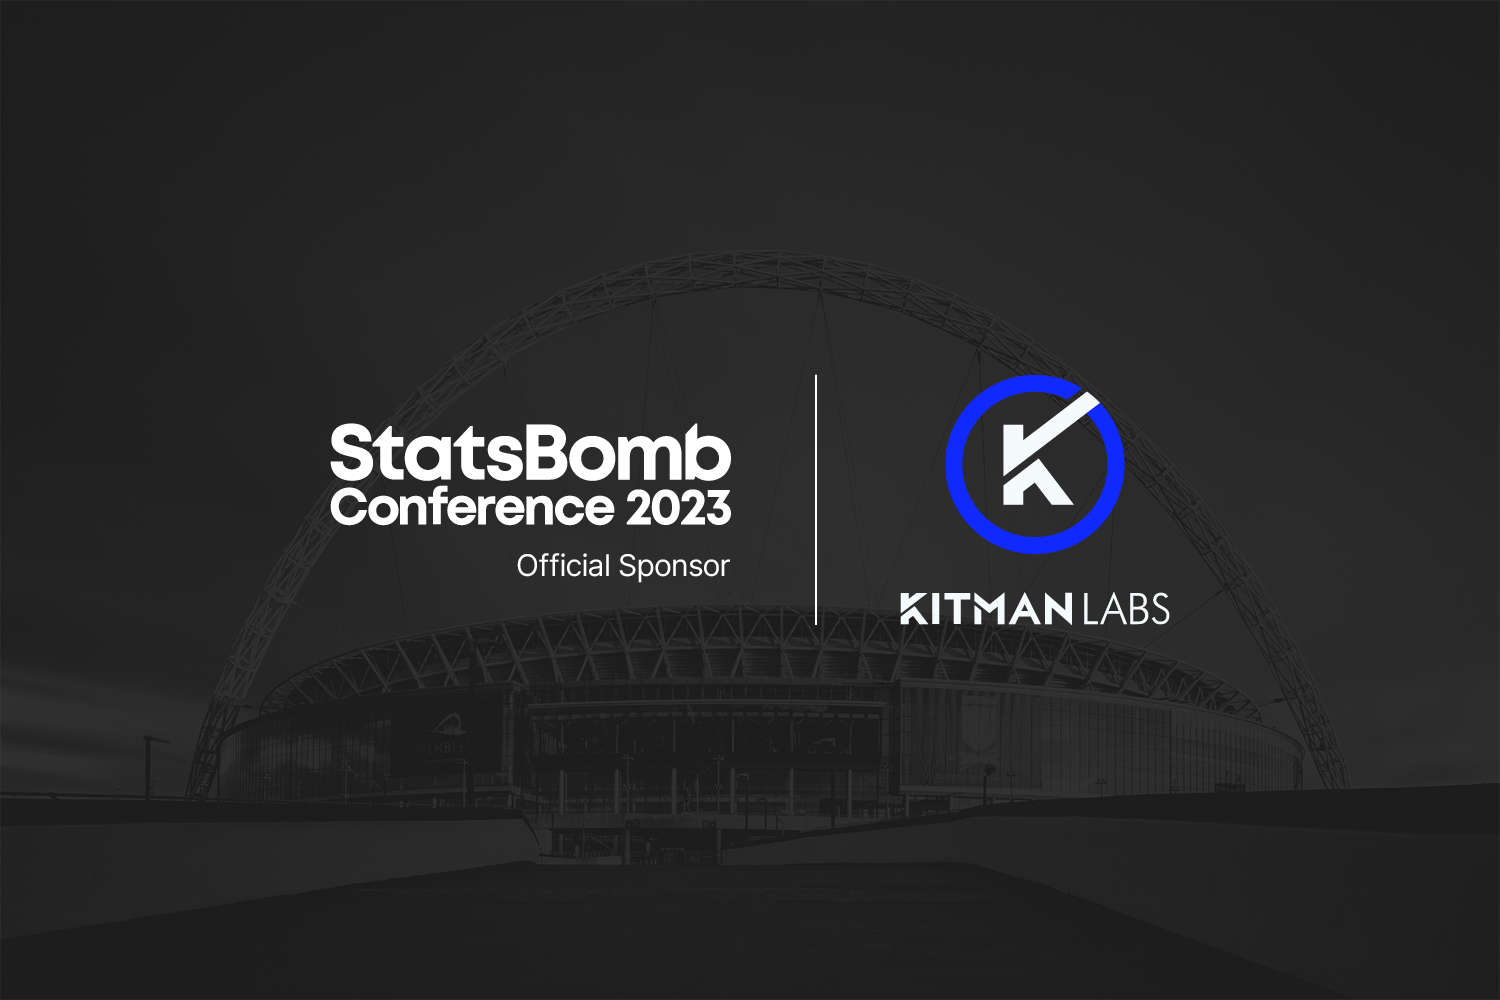 Kitman Labs Announced As A Sponsor For The 2023 StatsBomb Conference